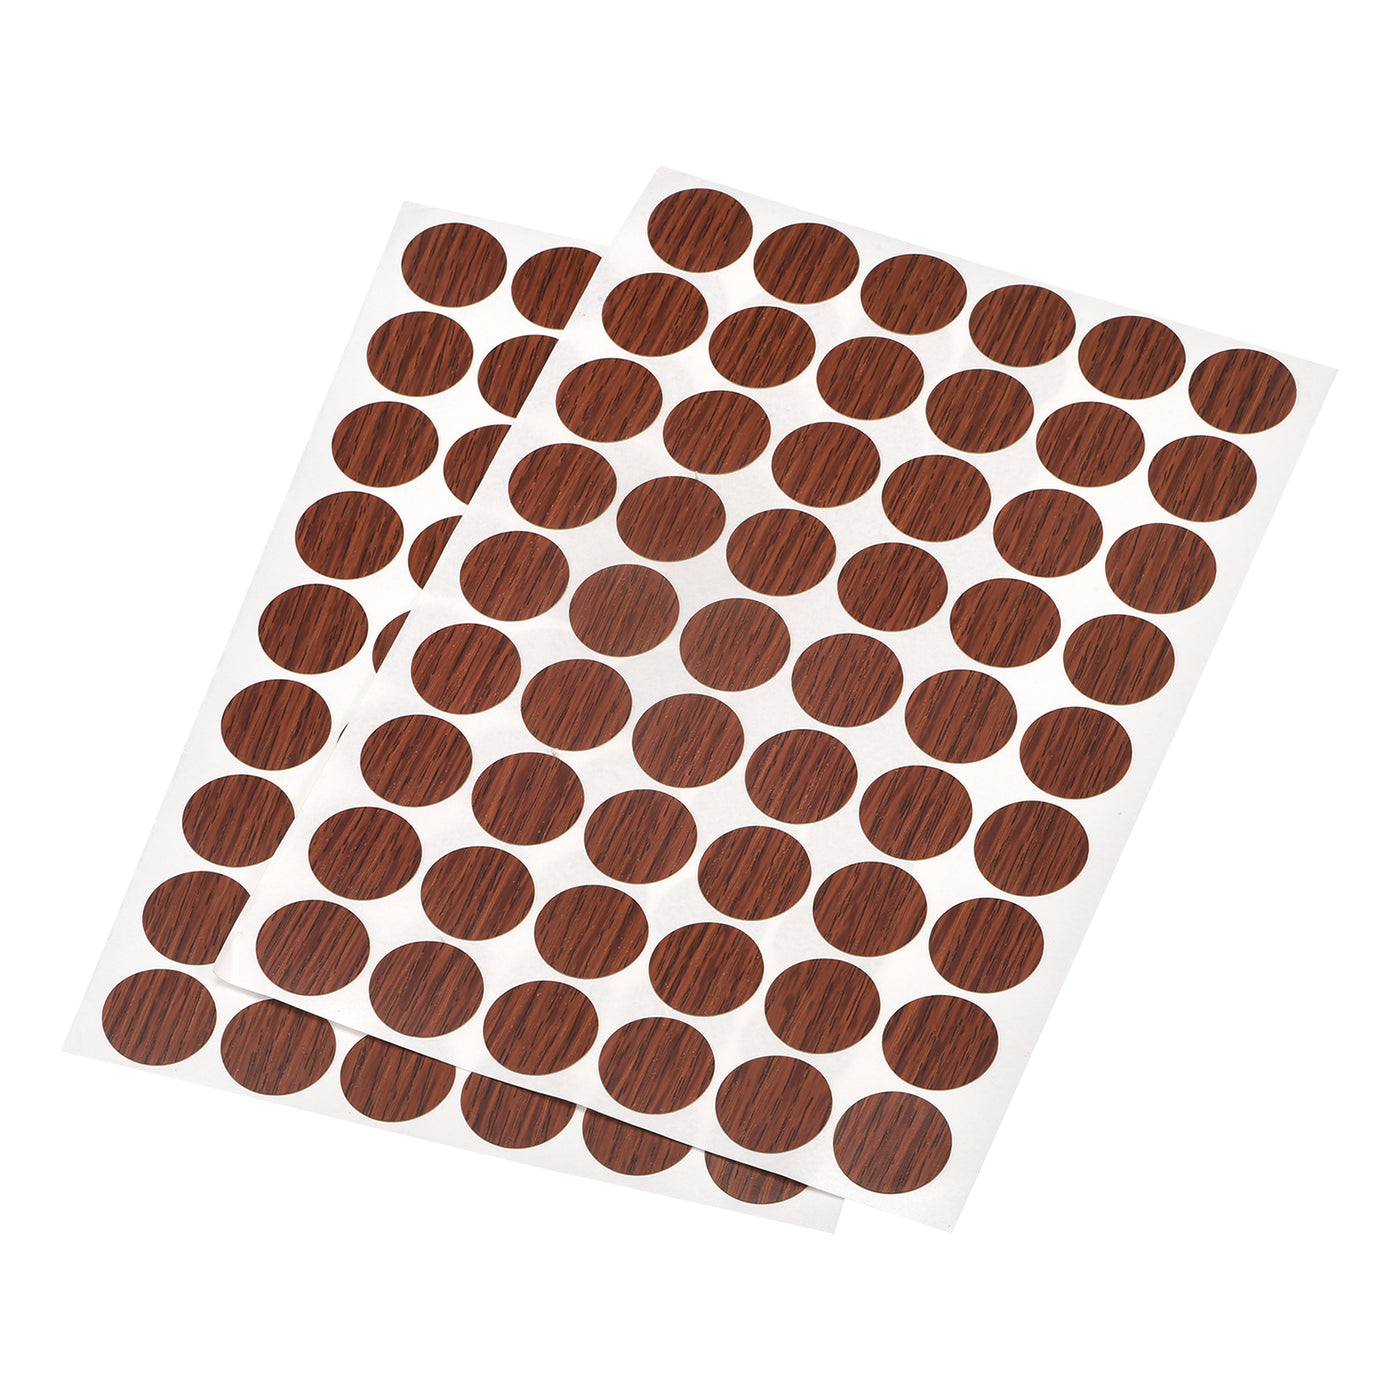 uxcell Uxcell Screw Hole Cover Stickers, 21mm Dia PVC Self Adhesive Covers Caps for Wood Furniture Cabinet Shelf Wardrobe, Walnut 6 Sheet/324pcs